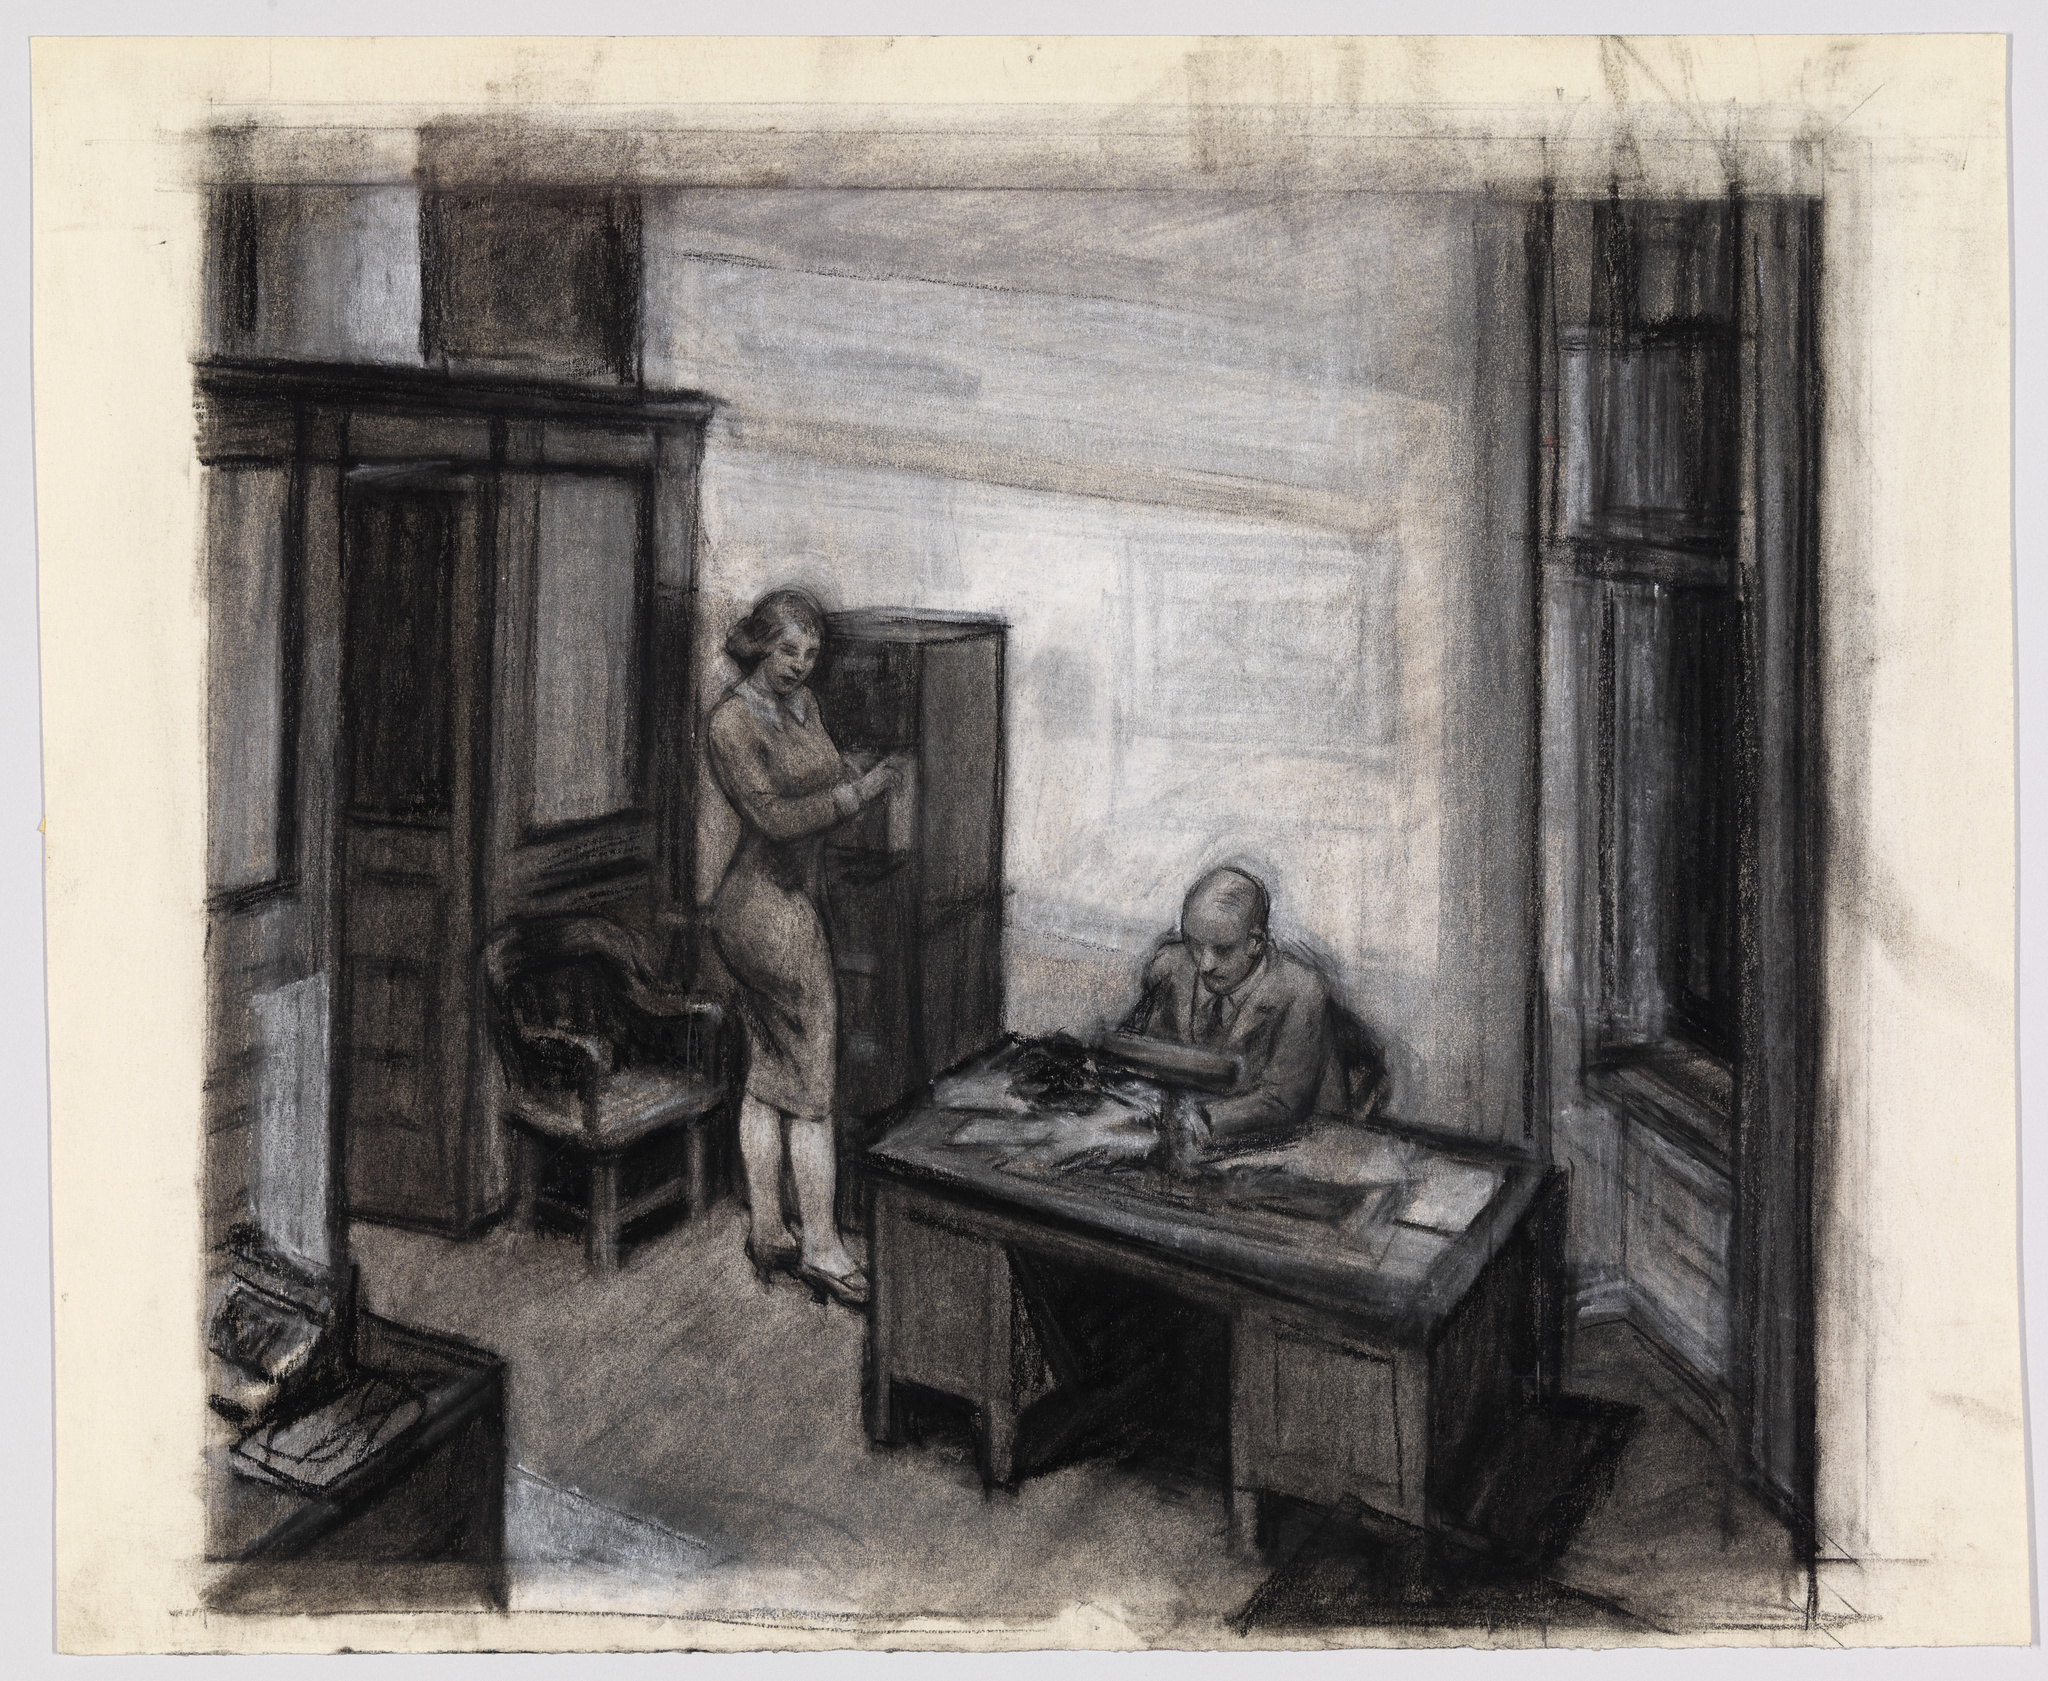 drawings Edward Hopper, Study for Office at Night, 1940, Whitney Museum of American of Art